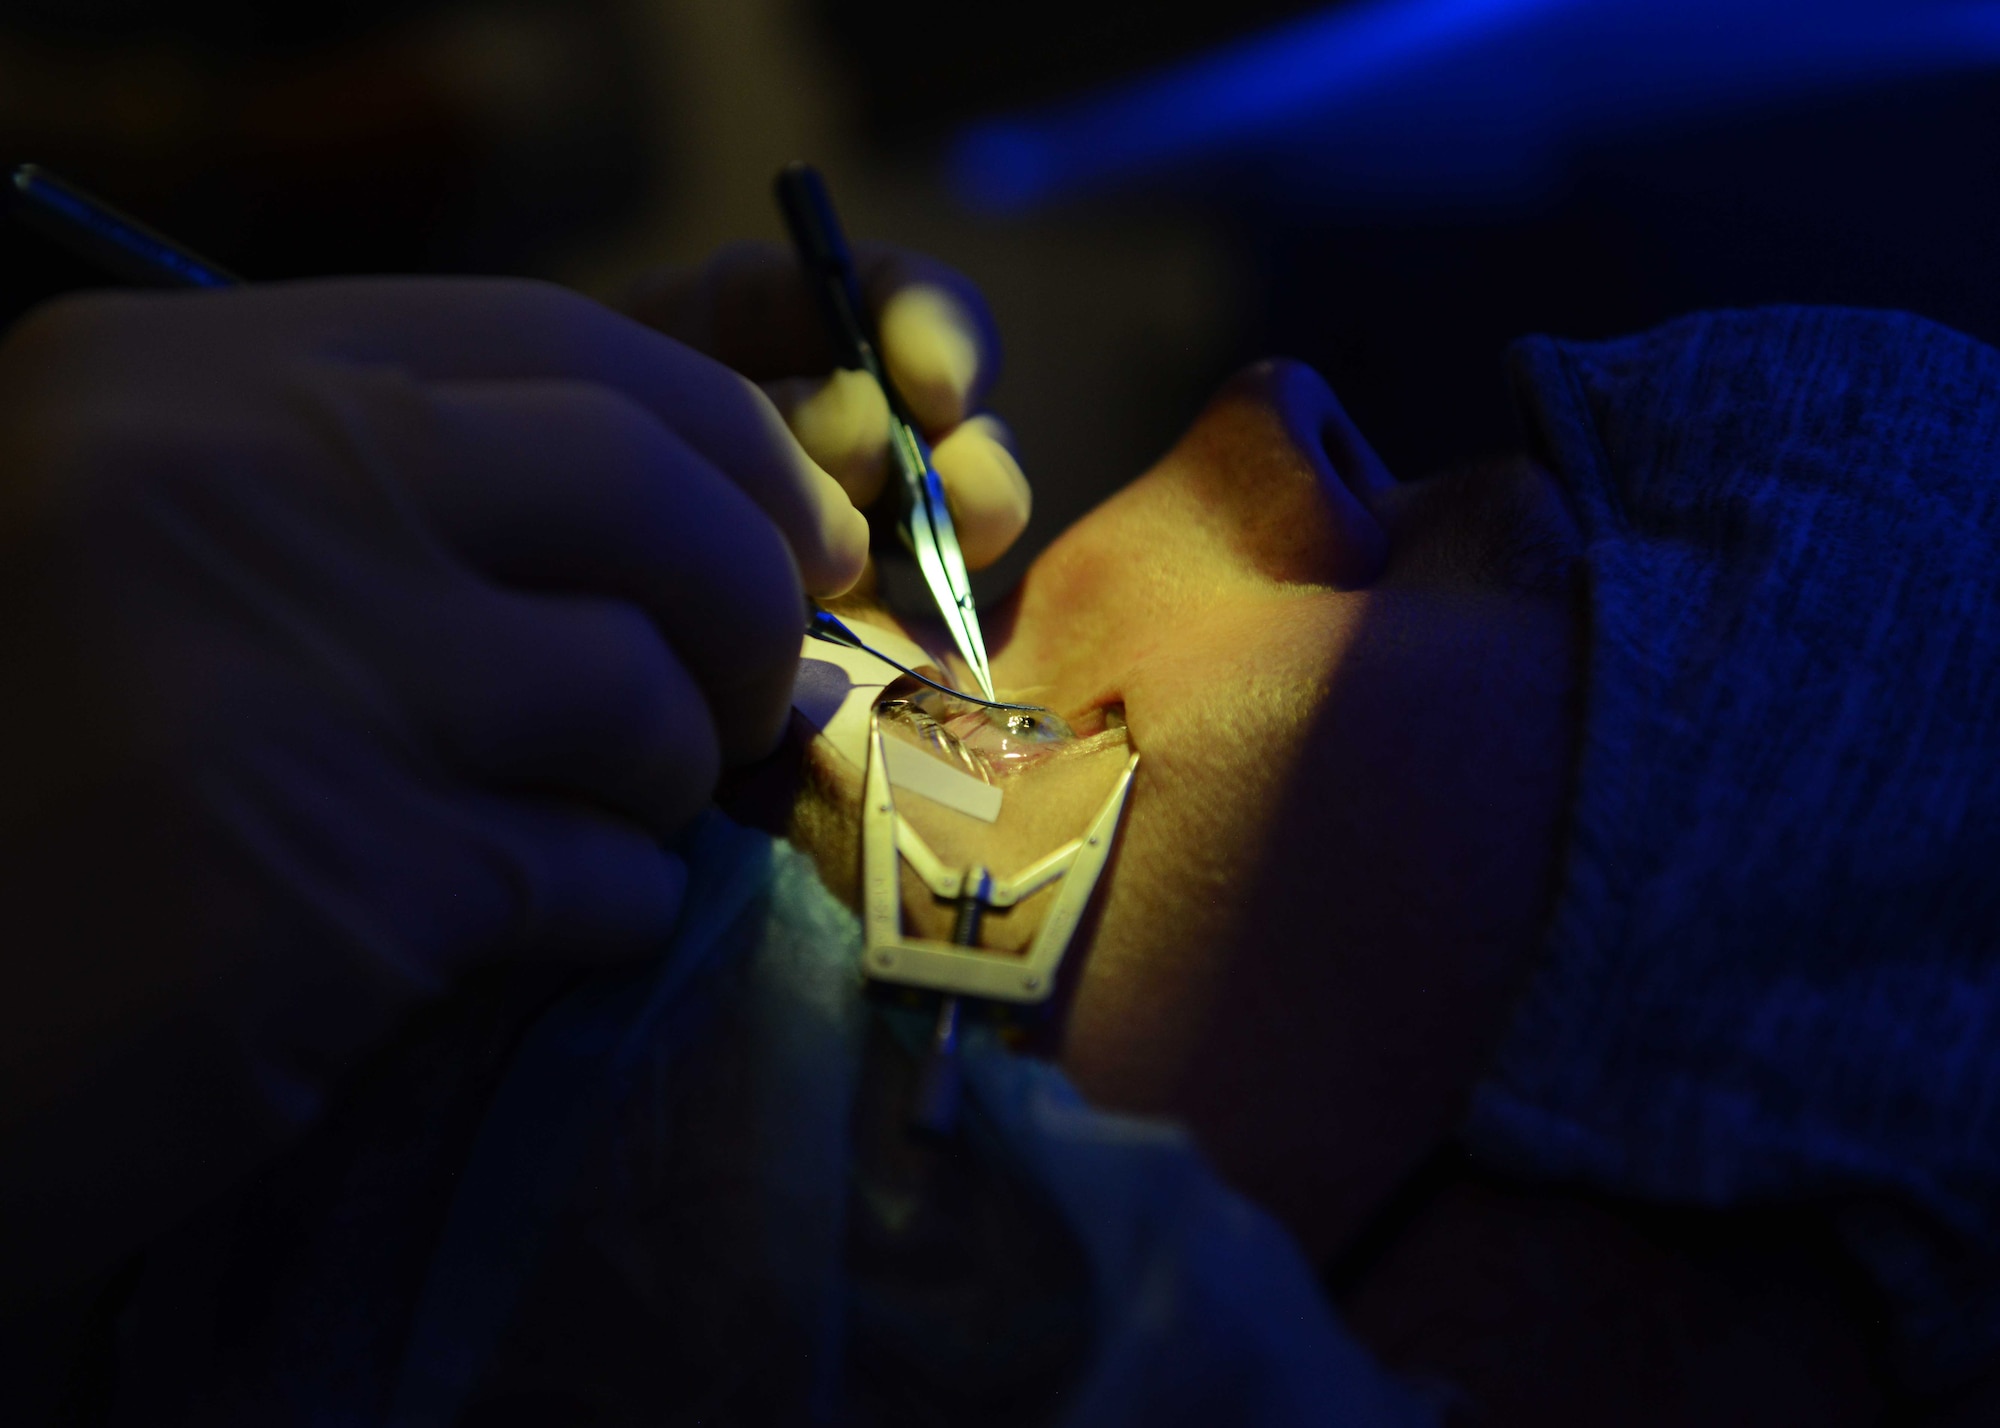 Staff Sgt. Zachary Martini, ophthalmology patient, undergoes a small incisional lenticular extraction (SMILE) eye surgery at the 10th Medical Group, Air Force Academy, Colo., Aug. 19, 2021.